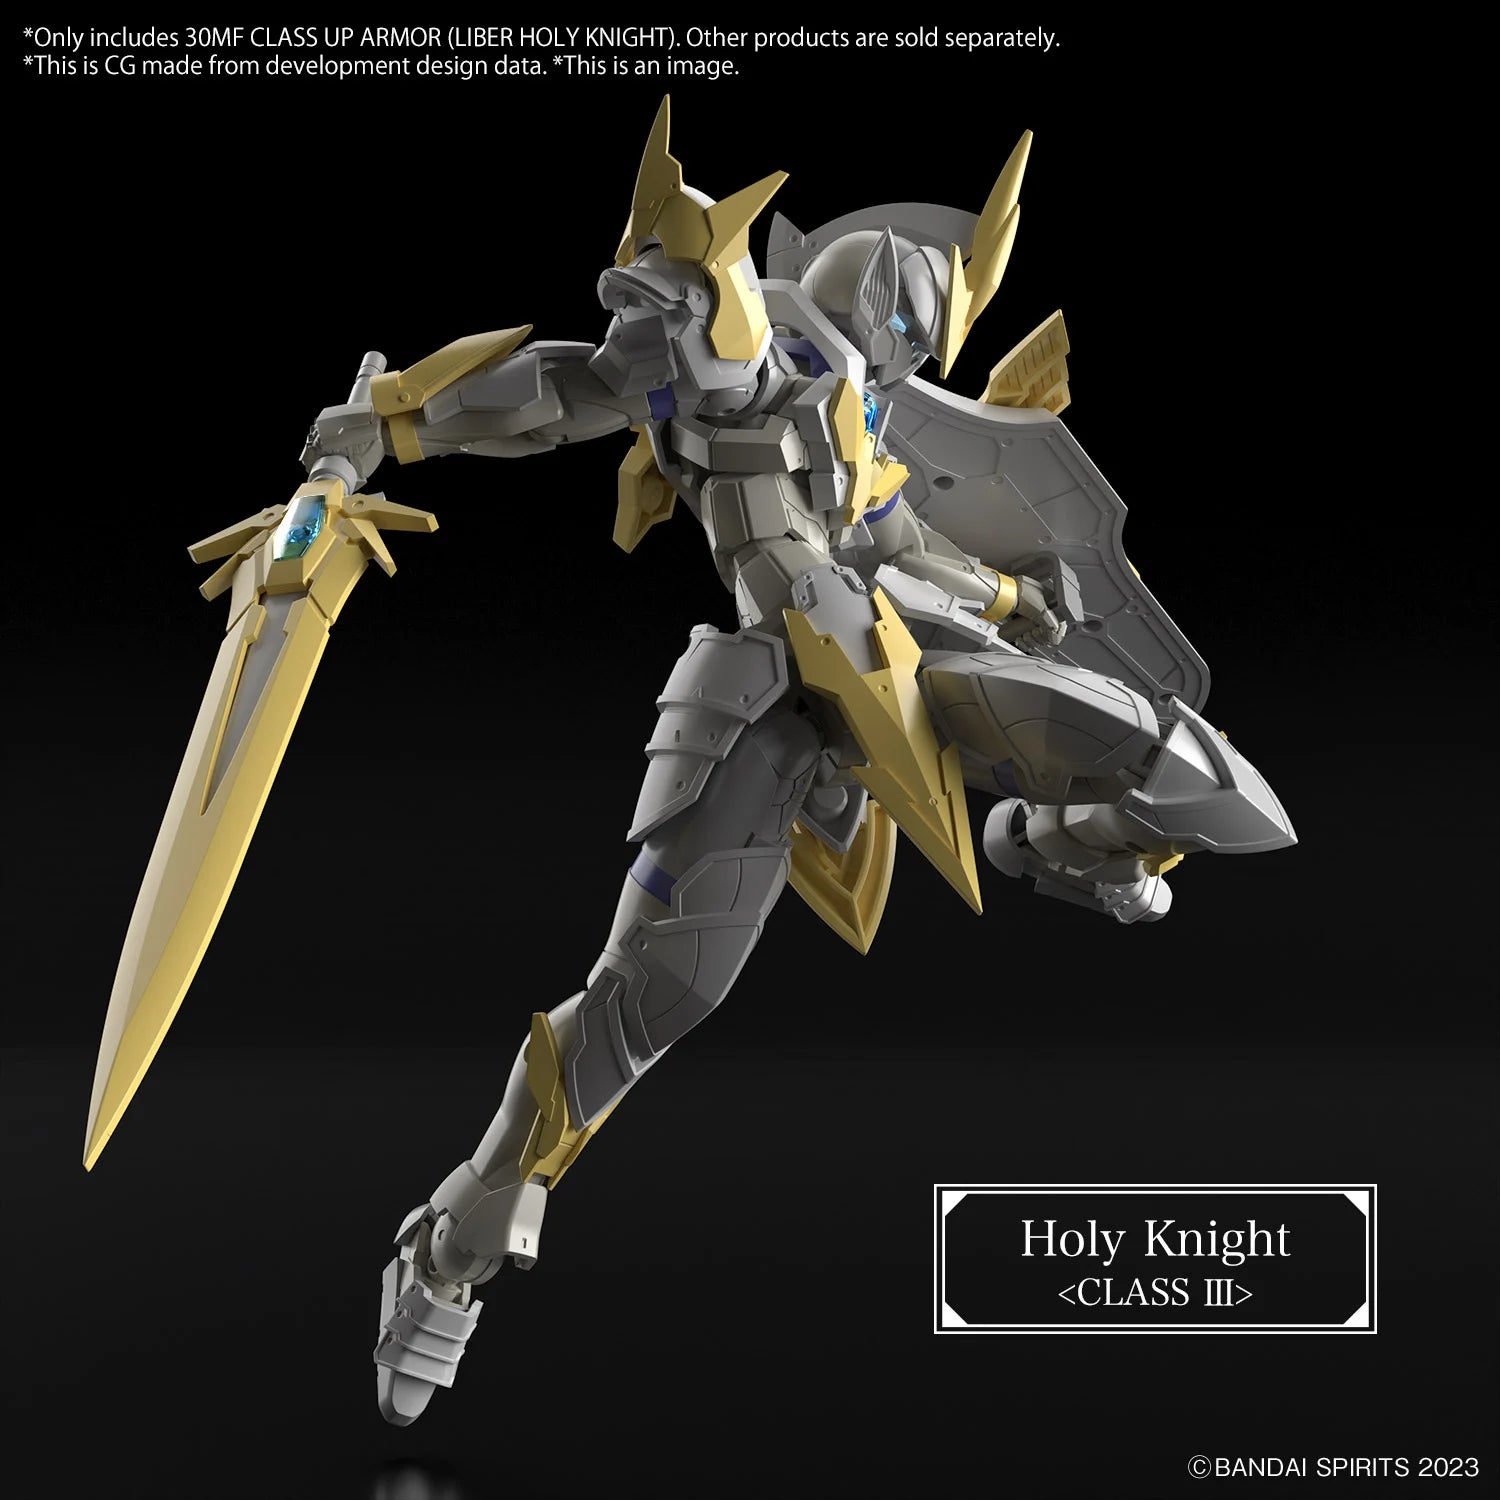 30MF - Class Up Armor - Liber Holy Knight